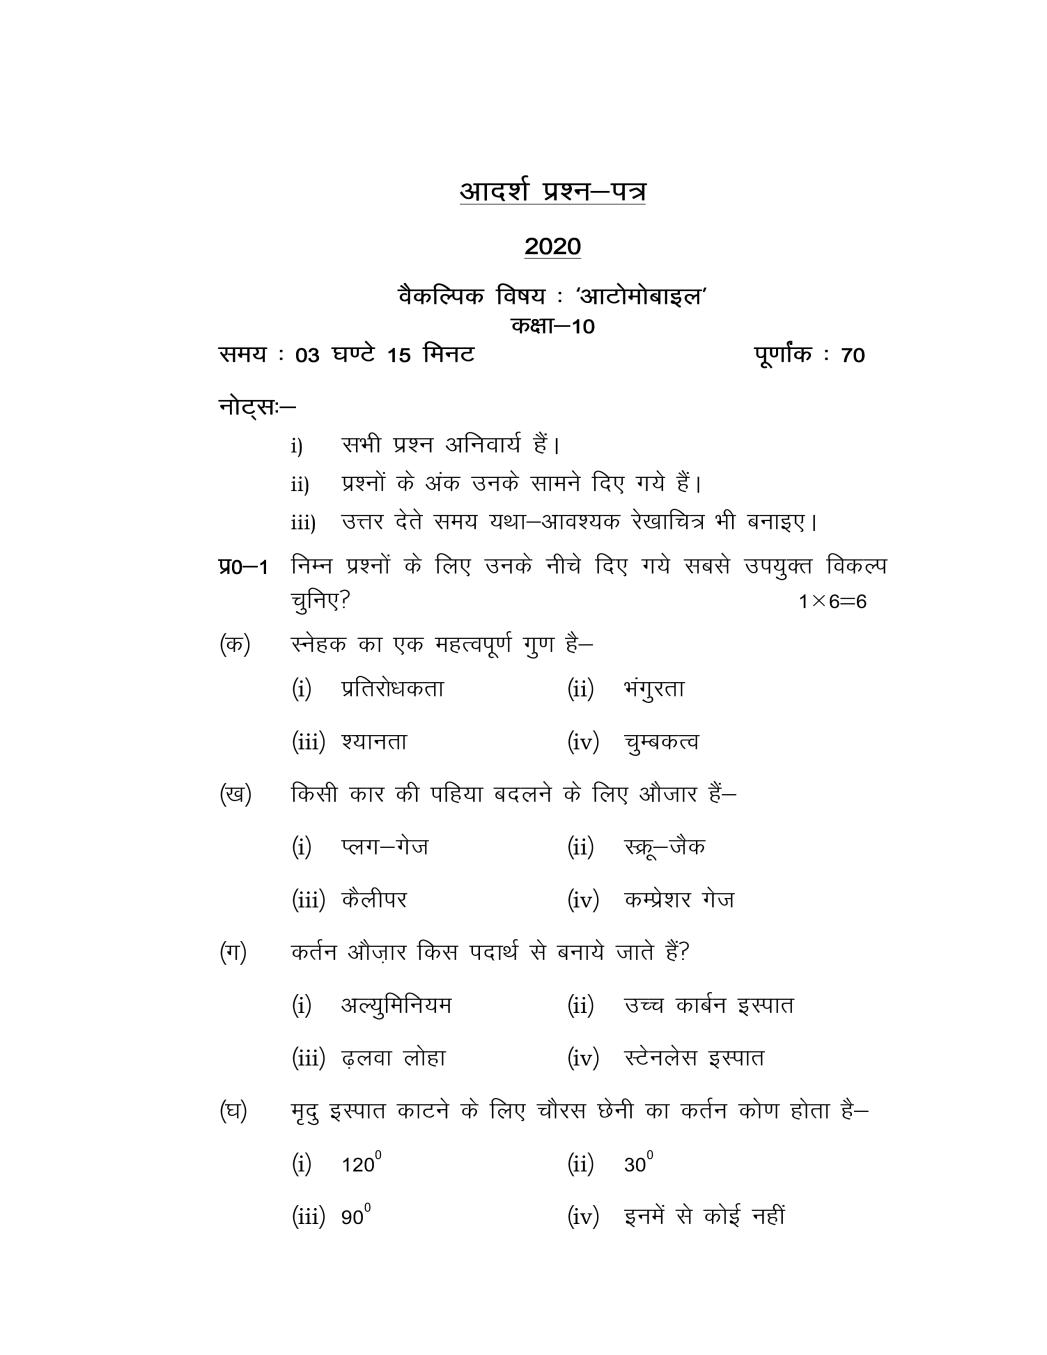 UP Board Class 10 Model Question Paper 2020 Automobile - Page 1